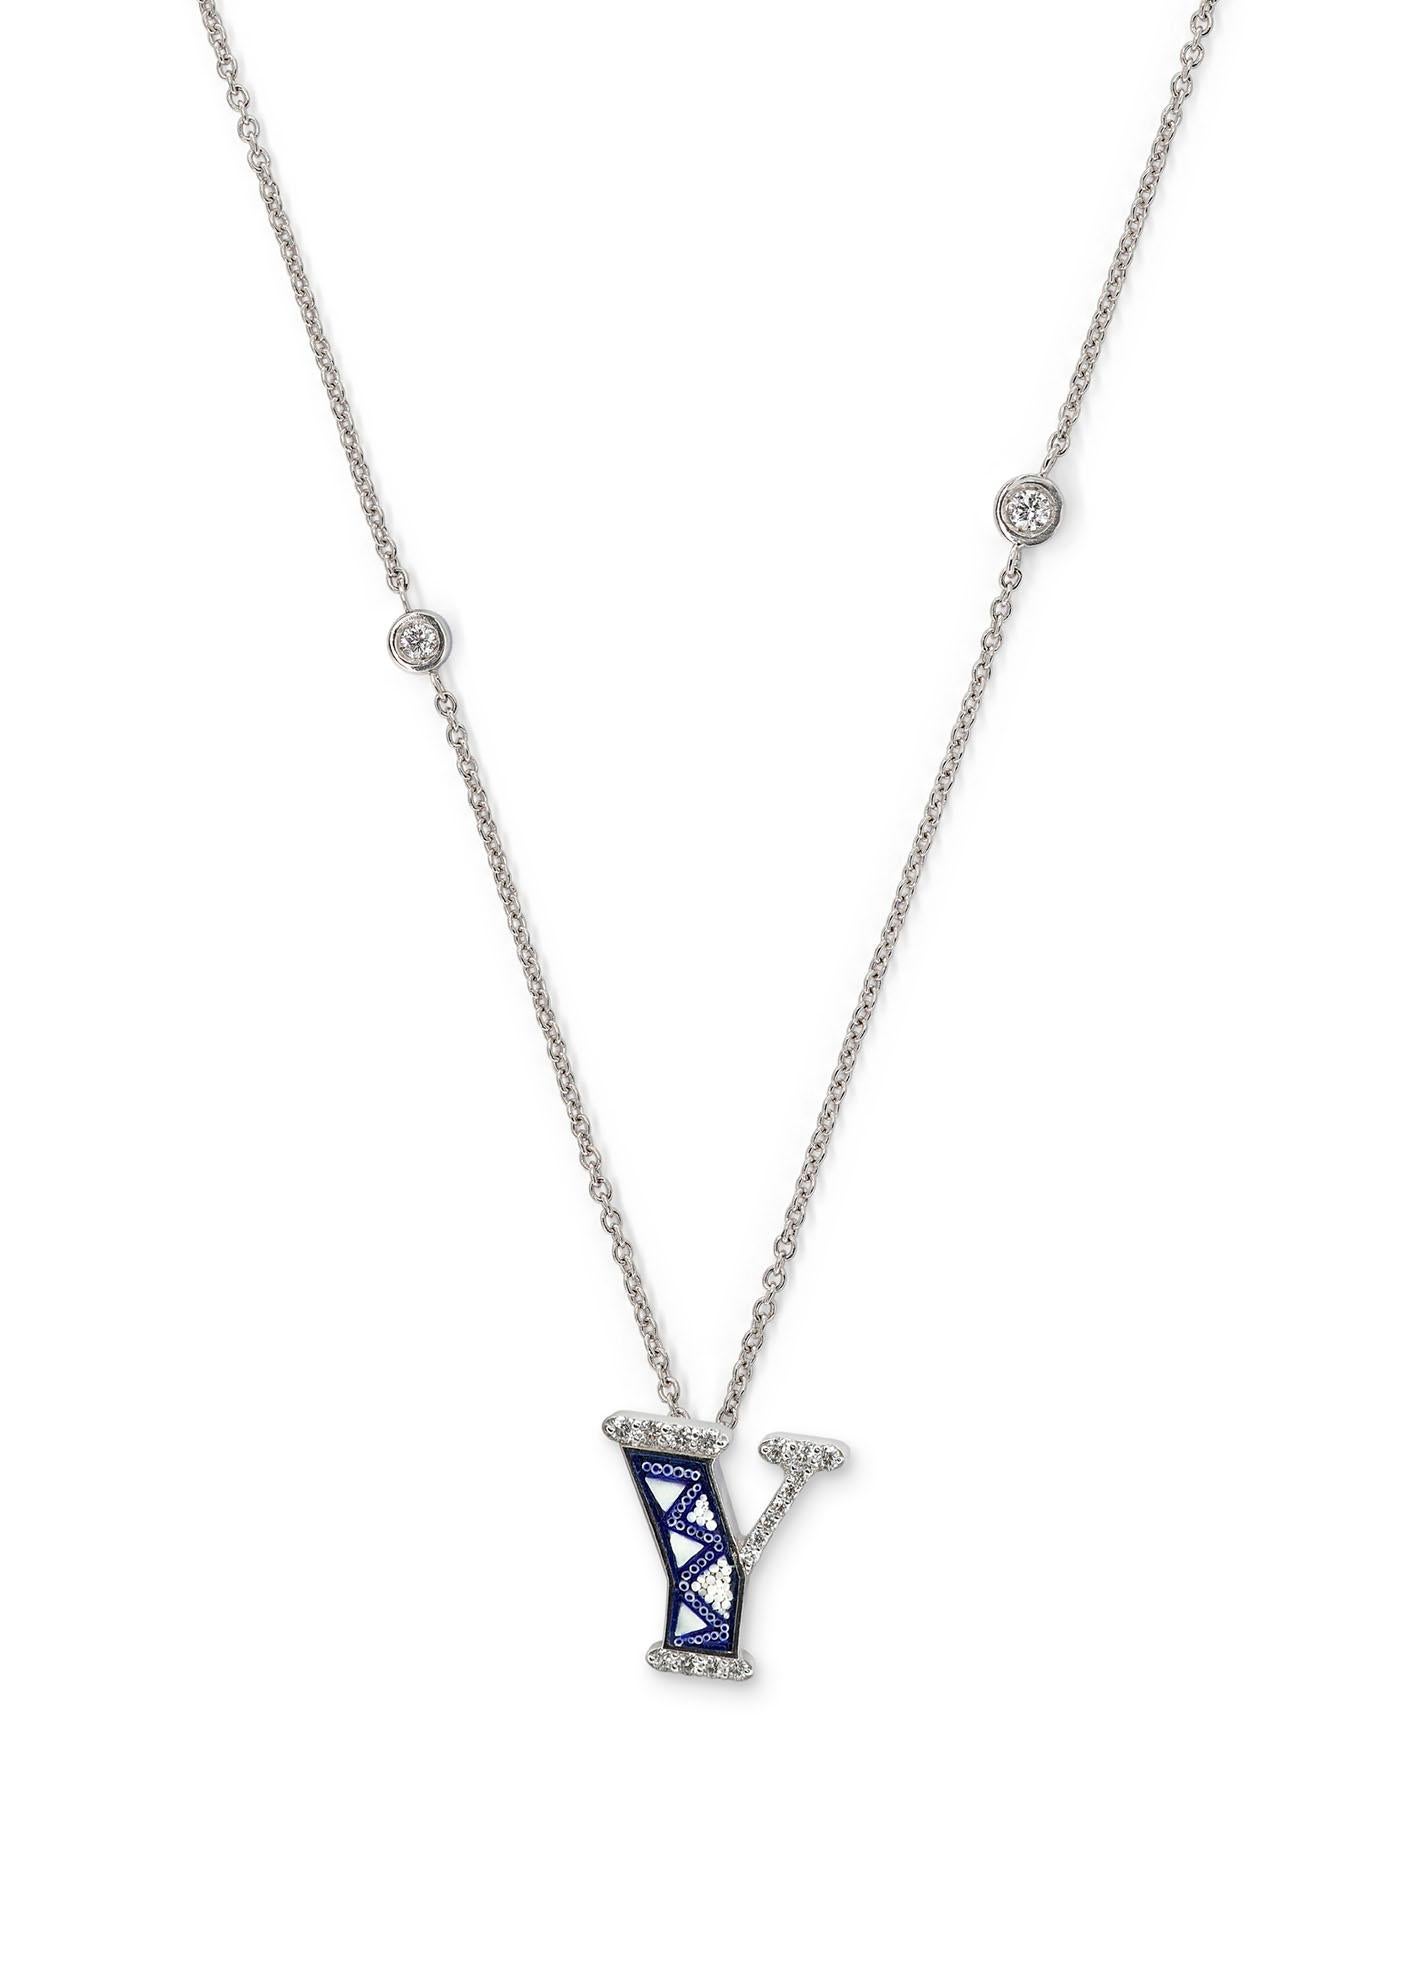 Brilliant Cut Necklace Letter Y White Gold White Diamonds Hand Decorated with Micromosaic For Sale